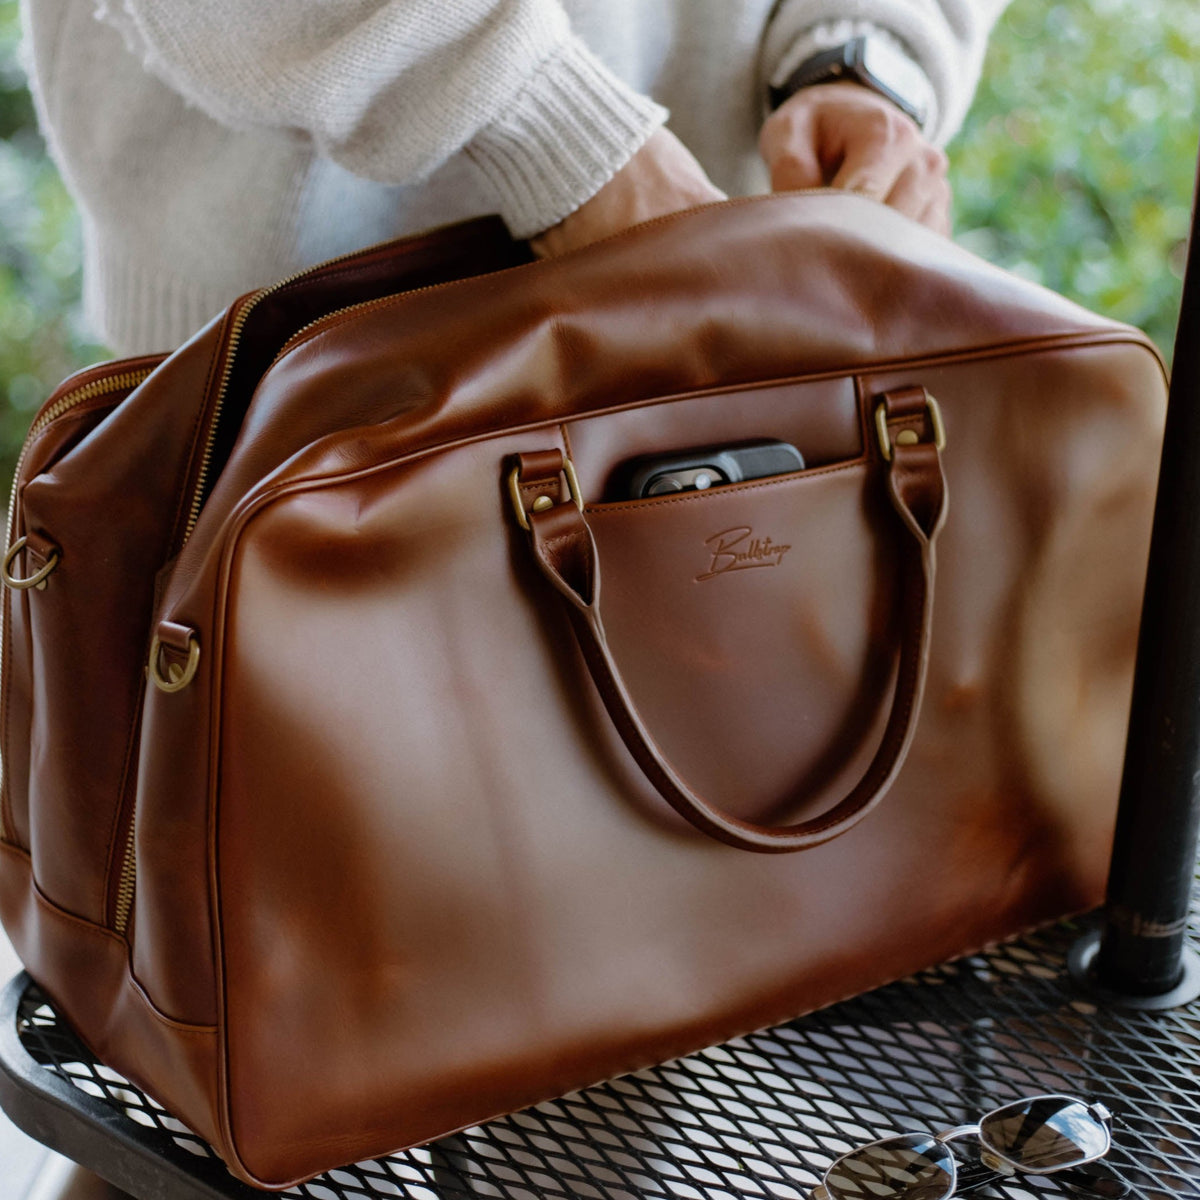 Dune Brown Leather Duffle Bag, Made in Italy